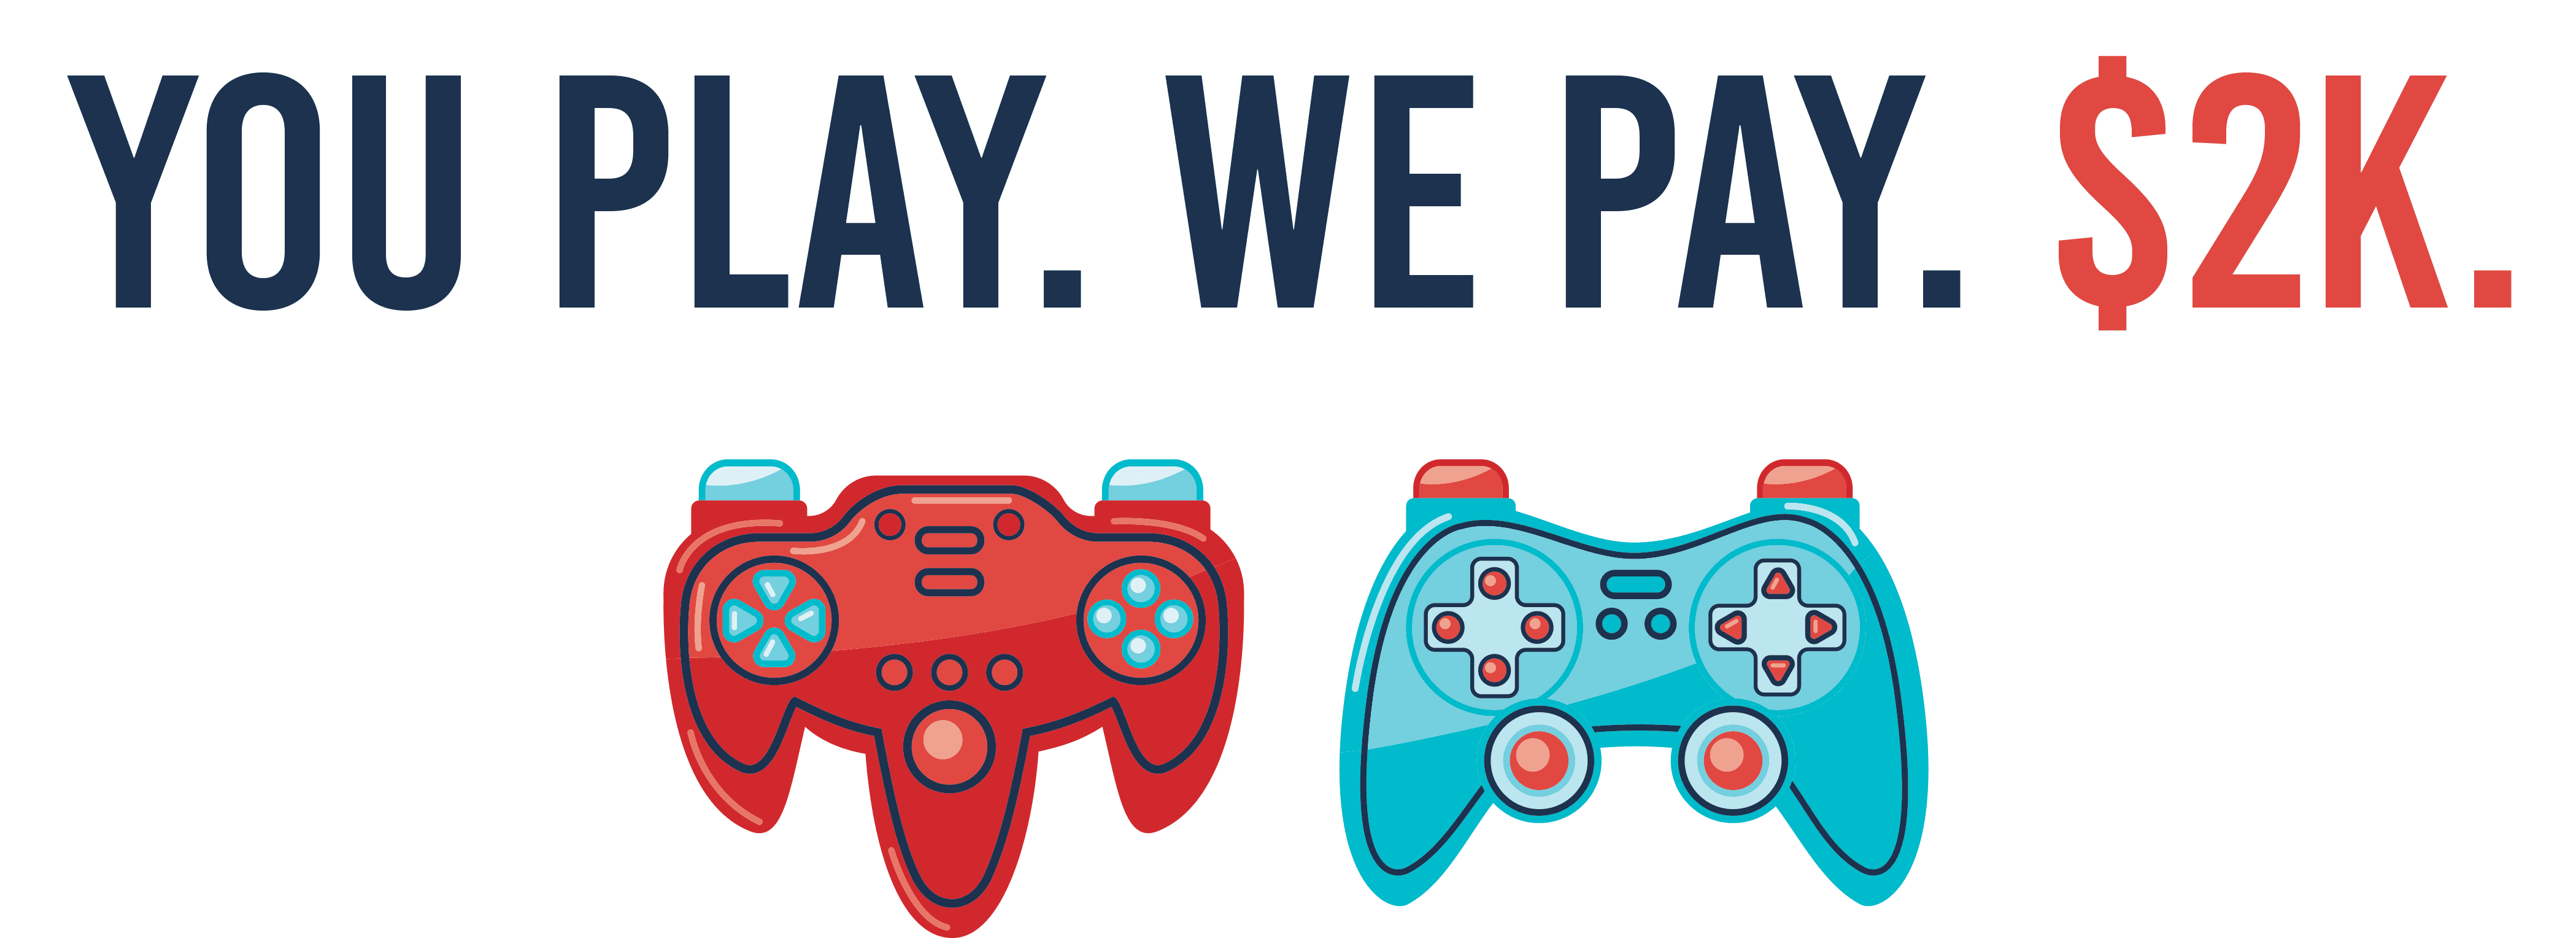 You Play. We Pay. $2k.